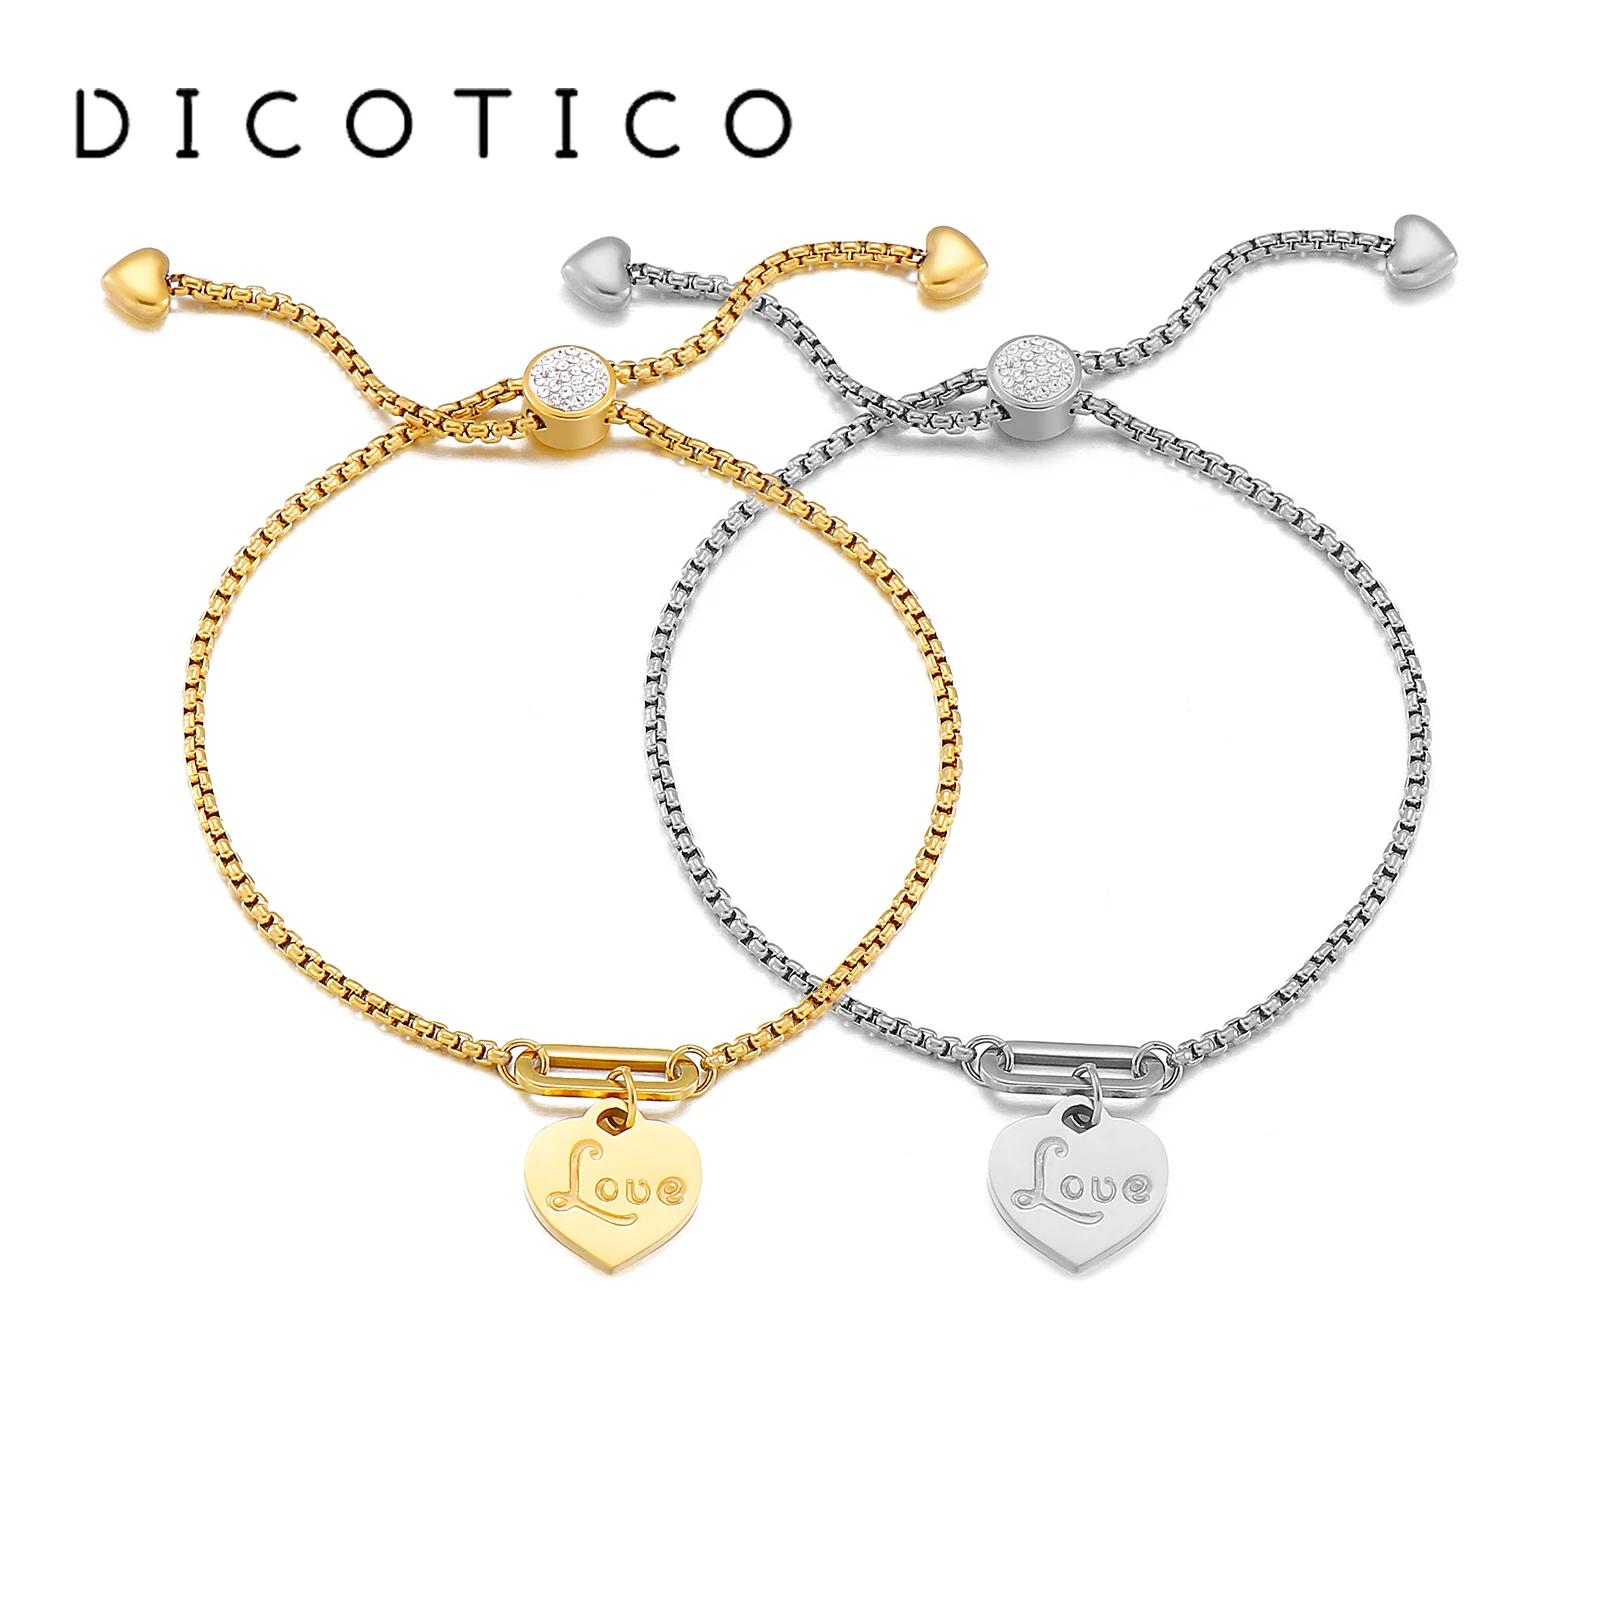 

DICOTICO Heart Rhineston Stainless Steel Charm Bracelets For Women Fashion Multiple Styles Pearl Chain Wristband Wedding Bangles